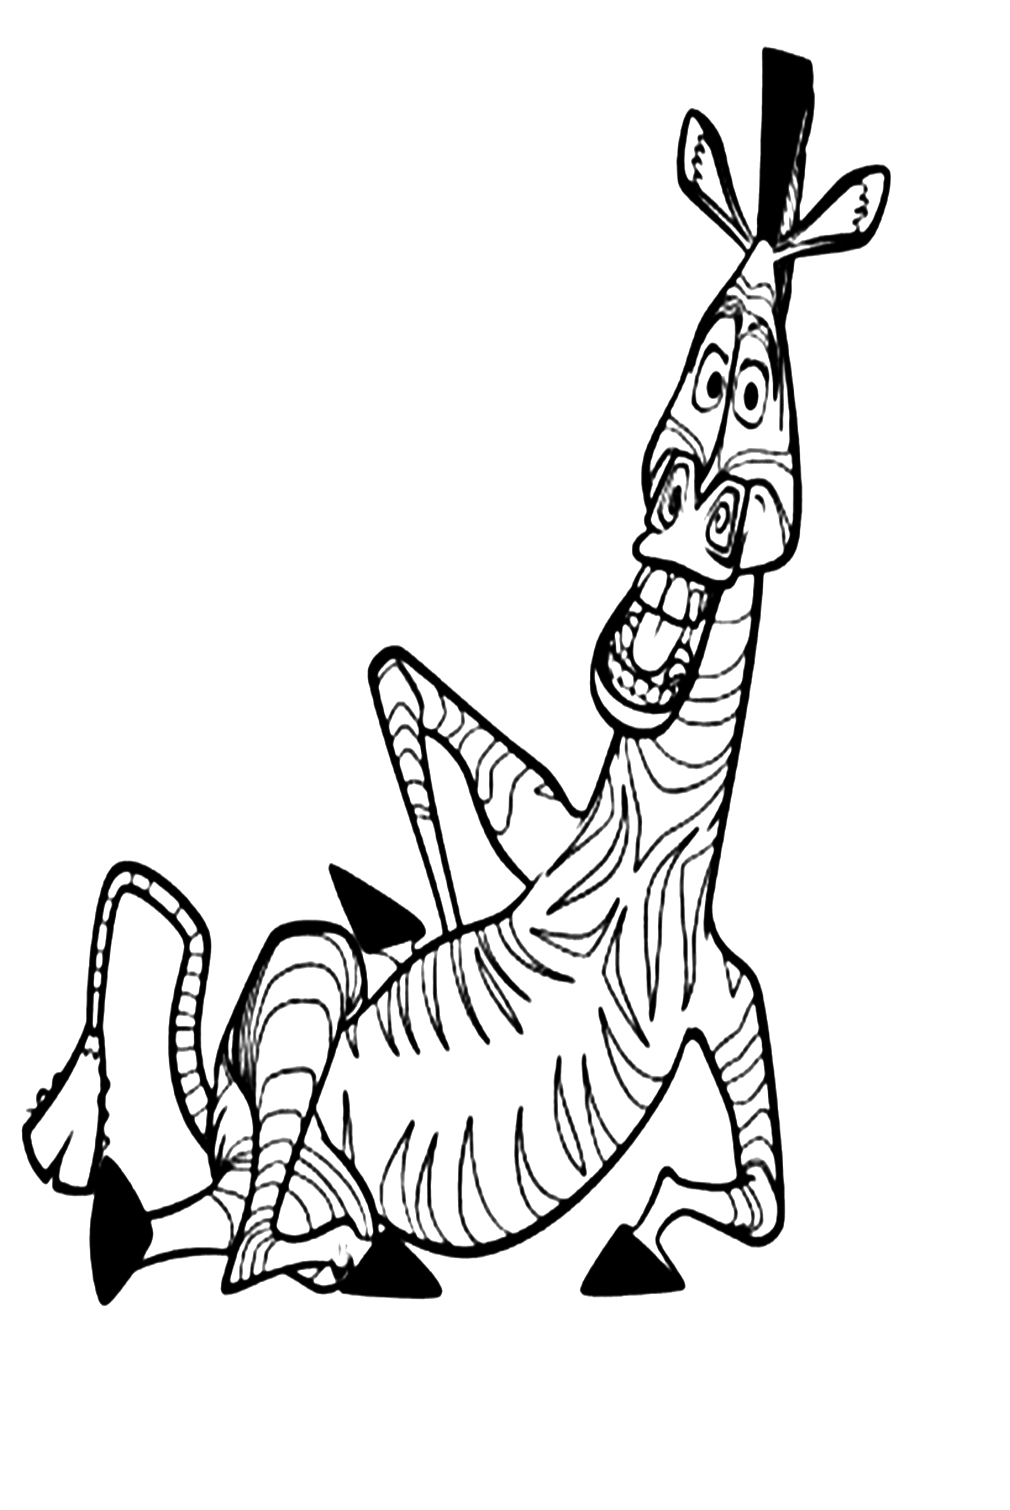 Awesome Marty Zebra Coloring Page